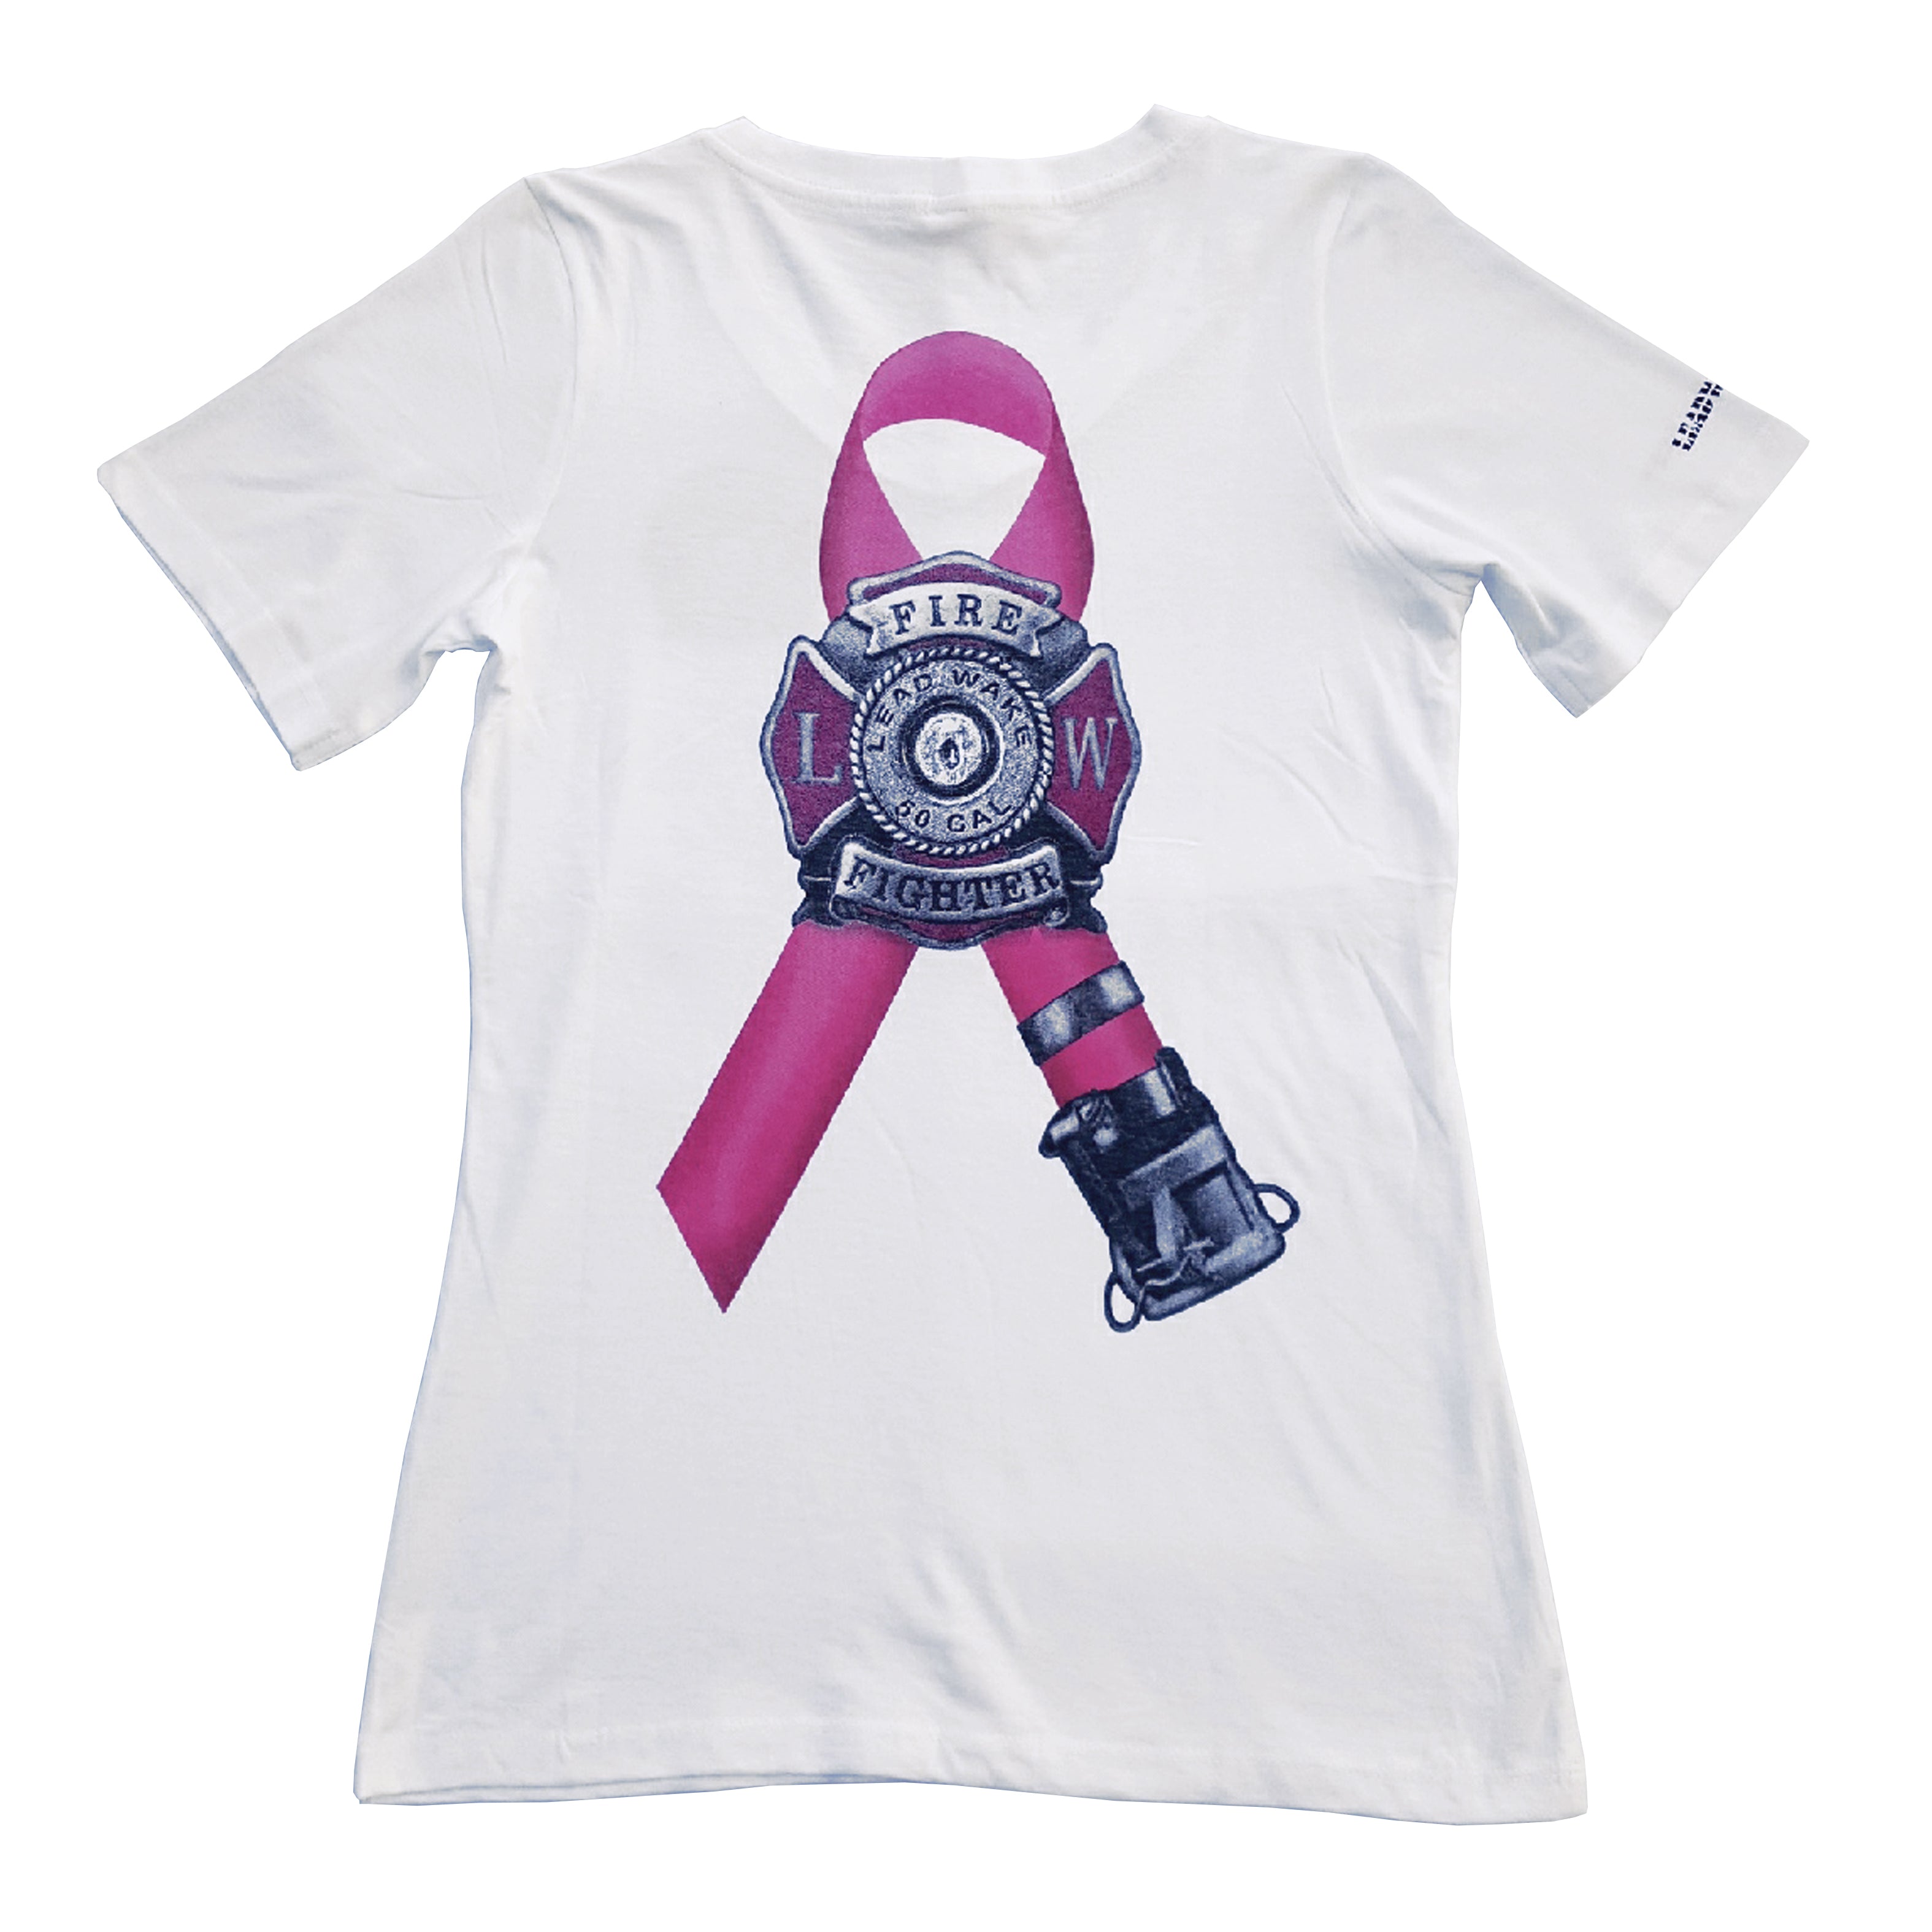 Women's Breast Cancer Awareness<br> T-Shirt in White